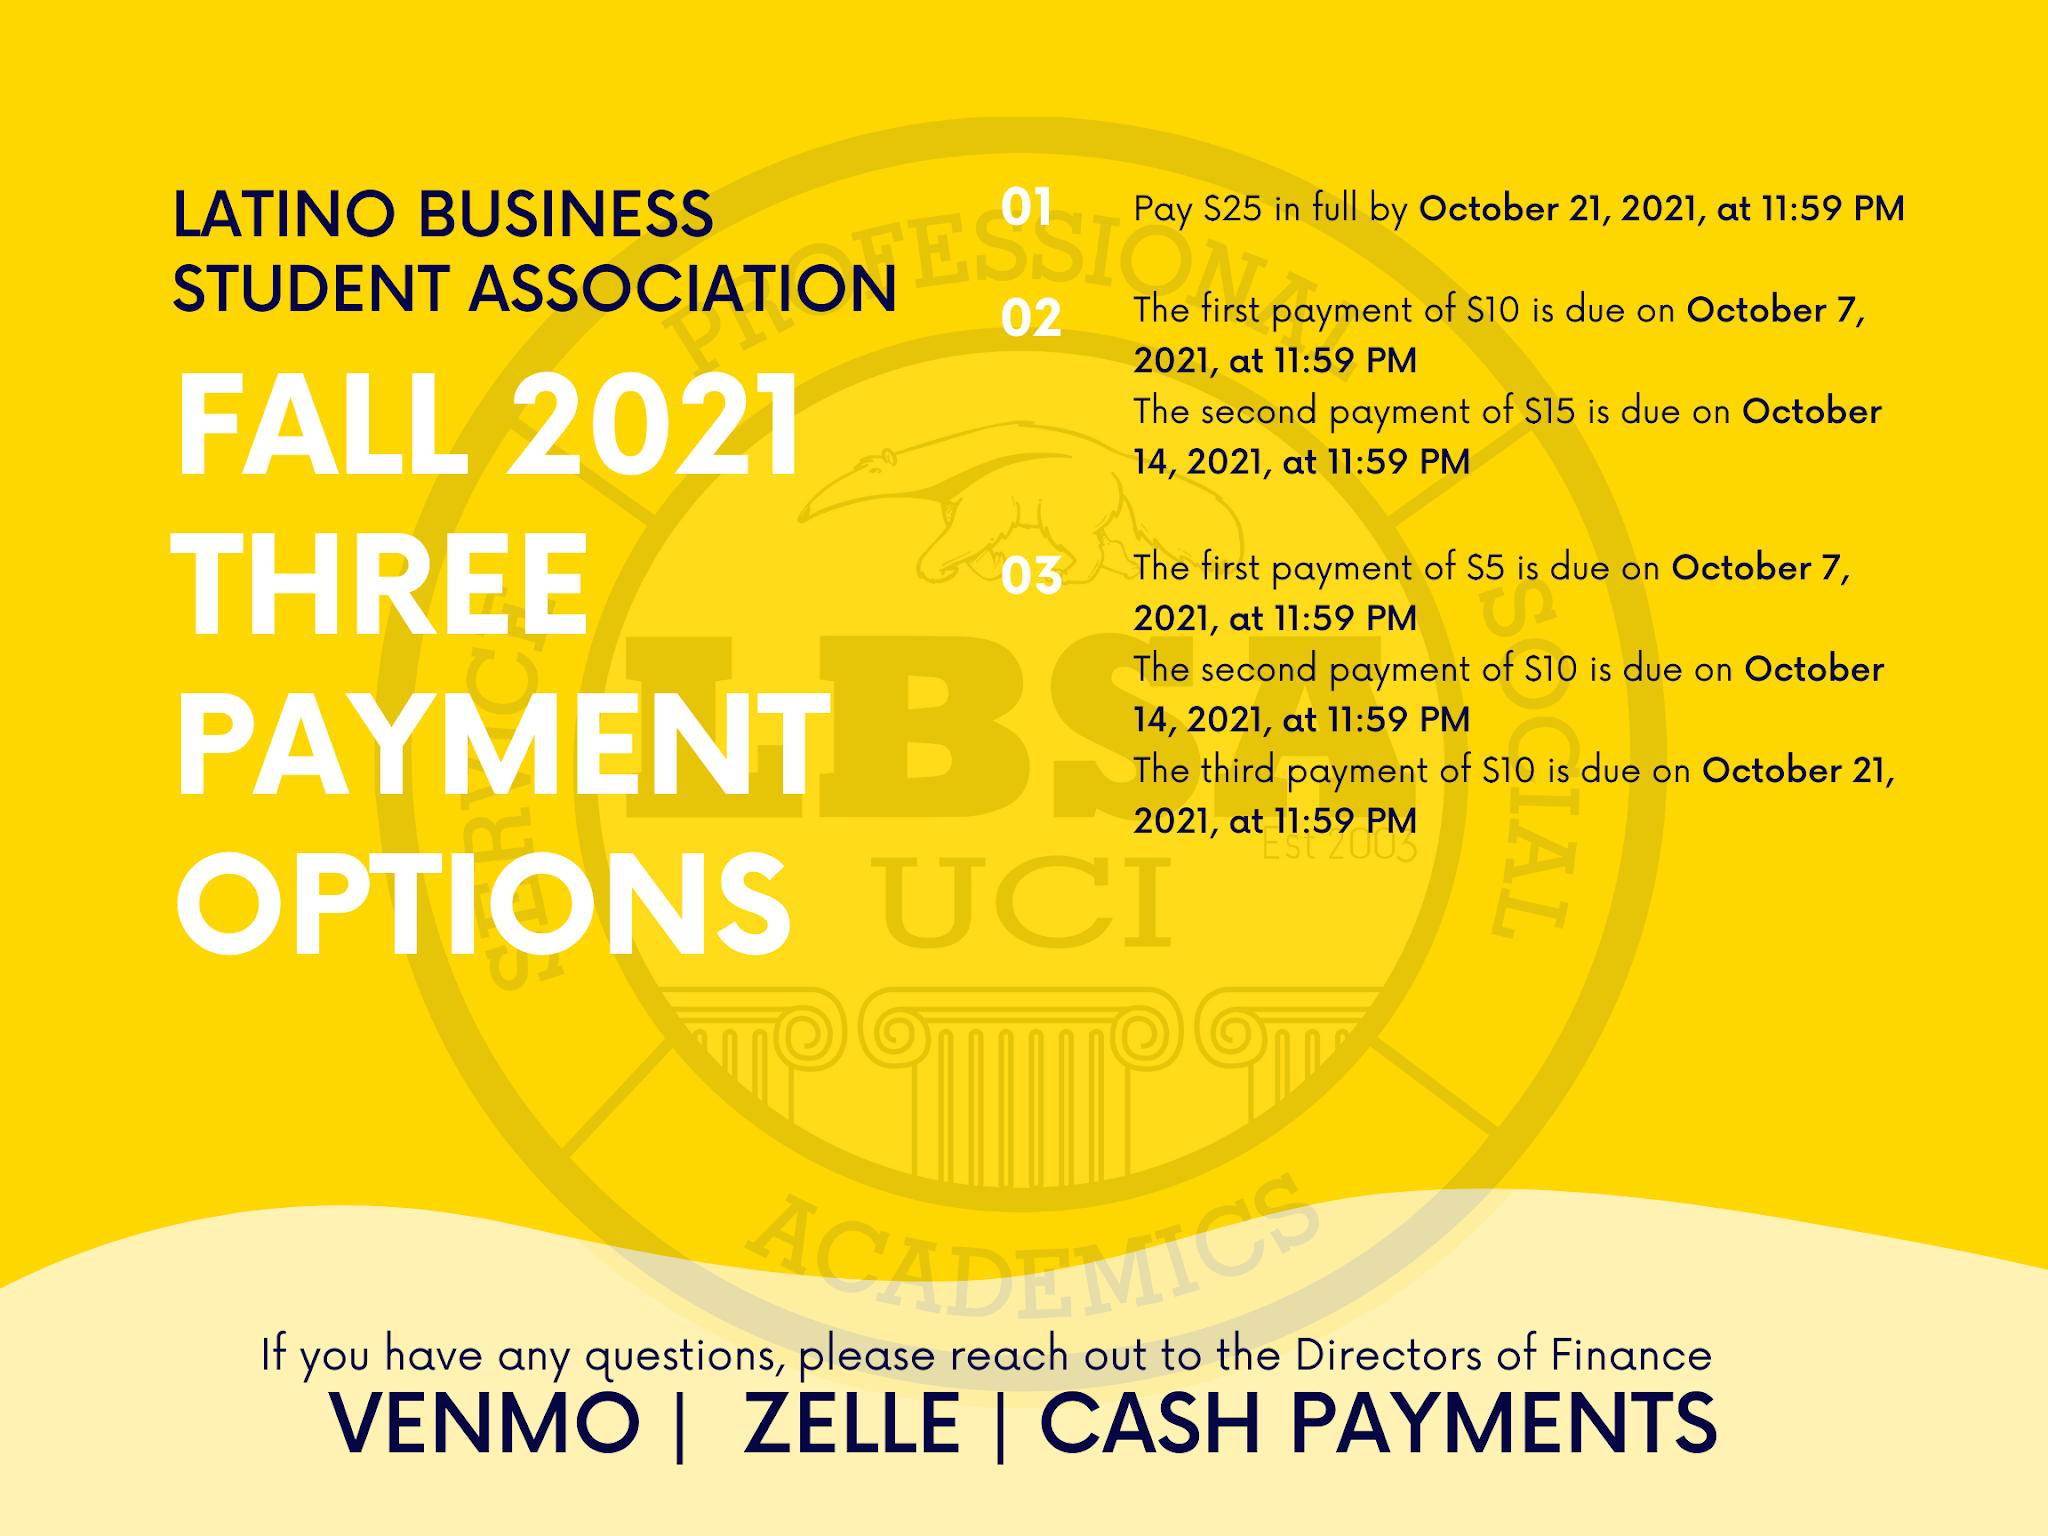 Venmo @LBSAUCI, Zelle is finance.lbsauci@gmail.com, and Cash payments can be processed in General Meetings (exact change only)